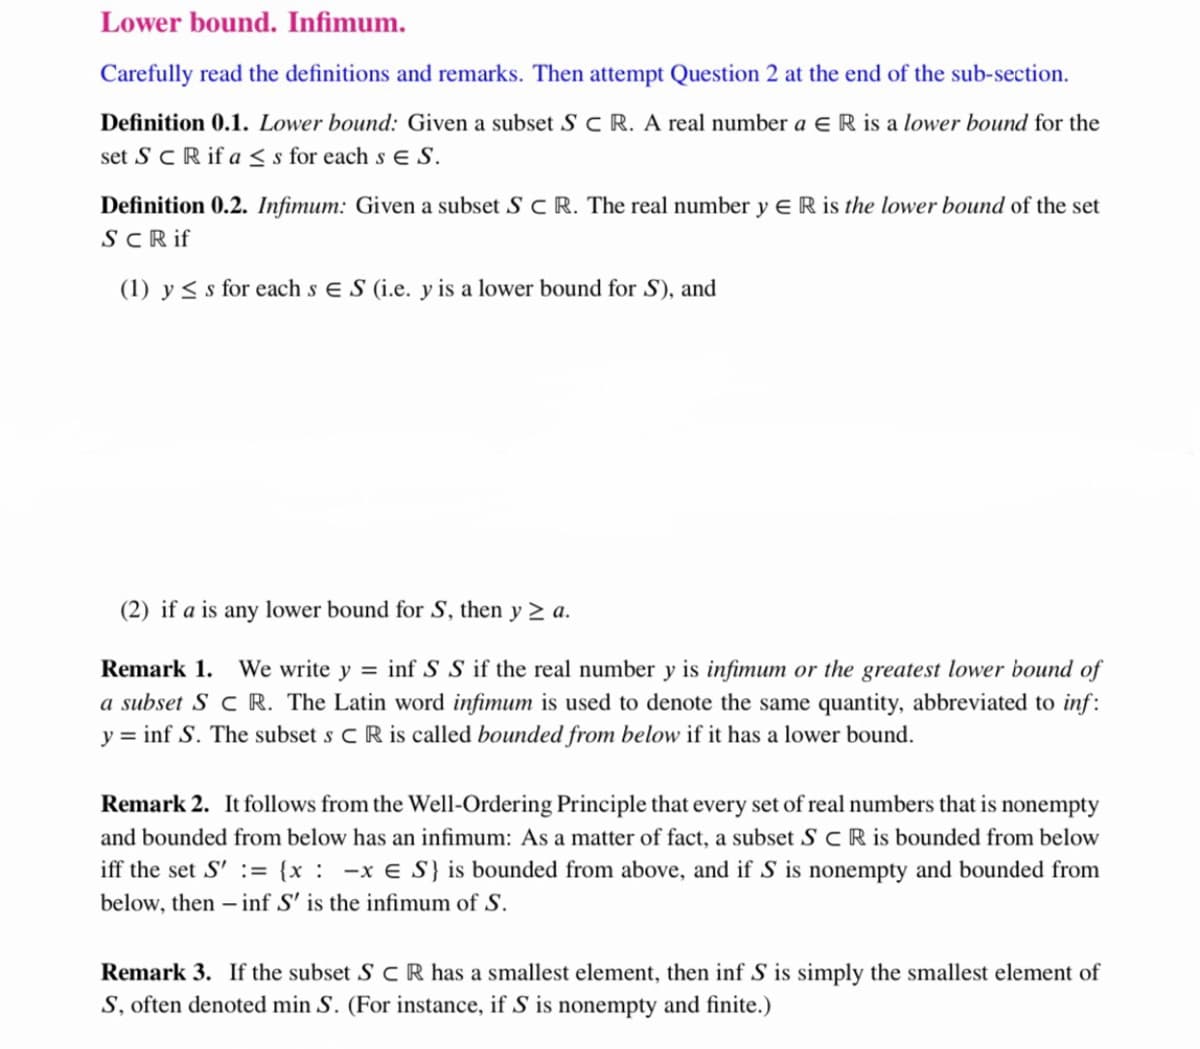 Lower bound. Infimum.
Carefully read the definitions and remarks. Then attempt Question 2 at the end of the sub-section.
Definition 0.1. Lower bound: Given a subset S C R. A real number a eR is a lower bound for the
set ScR if a < s for each s e S.
Definition 0.2. Infimum: Given a subset S C R. The real number y E R is the lower bound of the set
SCRif
(1) y < s for each s e S (i.e. y is a lower bound for S), and
(2) if a is any lower bound for S, then y > a.
Remark 1. We write y = inf S S if the real number y is infimum or the greatest lower bound of
a subset S C R. The Latin word infimum is used to denote the same quantity, abbreviated to inf:
y = inf S. The subset s CR is called bounded from below if it has a lower bound.
Remark 2. It follows from the Well-Ordering Principle that every set of real numbers that is nonempty
and bounded from below has an infimum: As a matter of fact, a subset S C R is bounded from below
iff the set S' := {x: -x € S} is bounded from above, and if S is nonempty and bounded from
below, then – inf S' is the infimum of S.
Remark 3. If the subset S c R has a smallest element, then inf S is simply the smallest element of
S, often denoted min S. (For instance, if S is nonempty and finite.)
